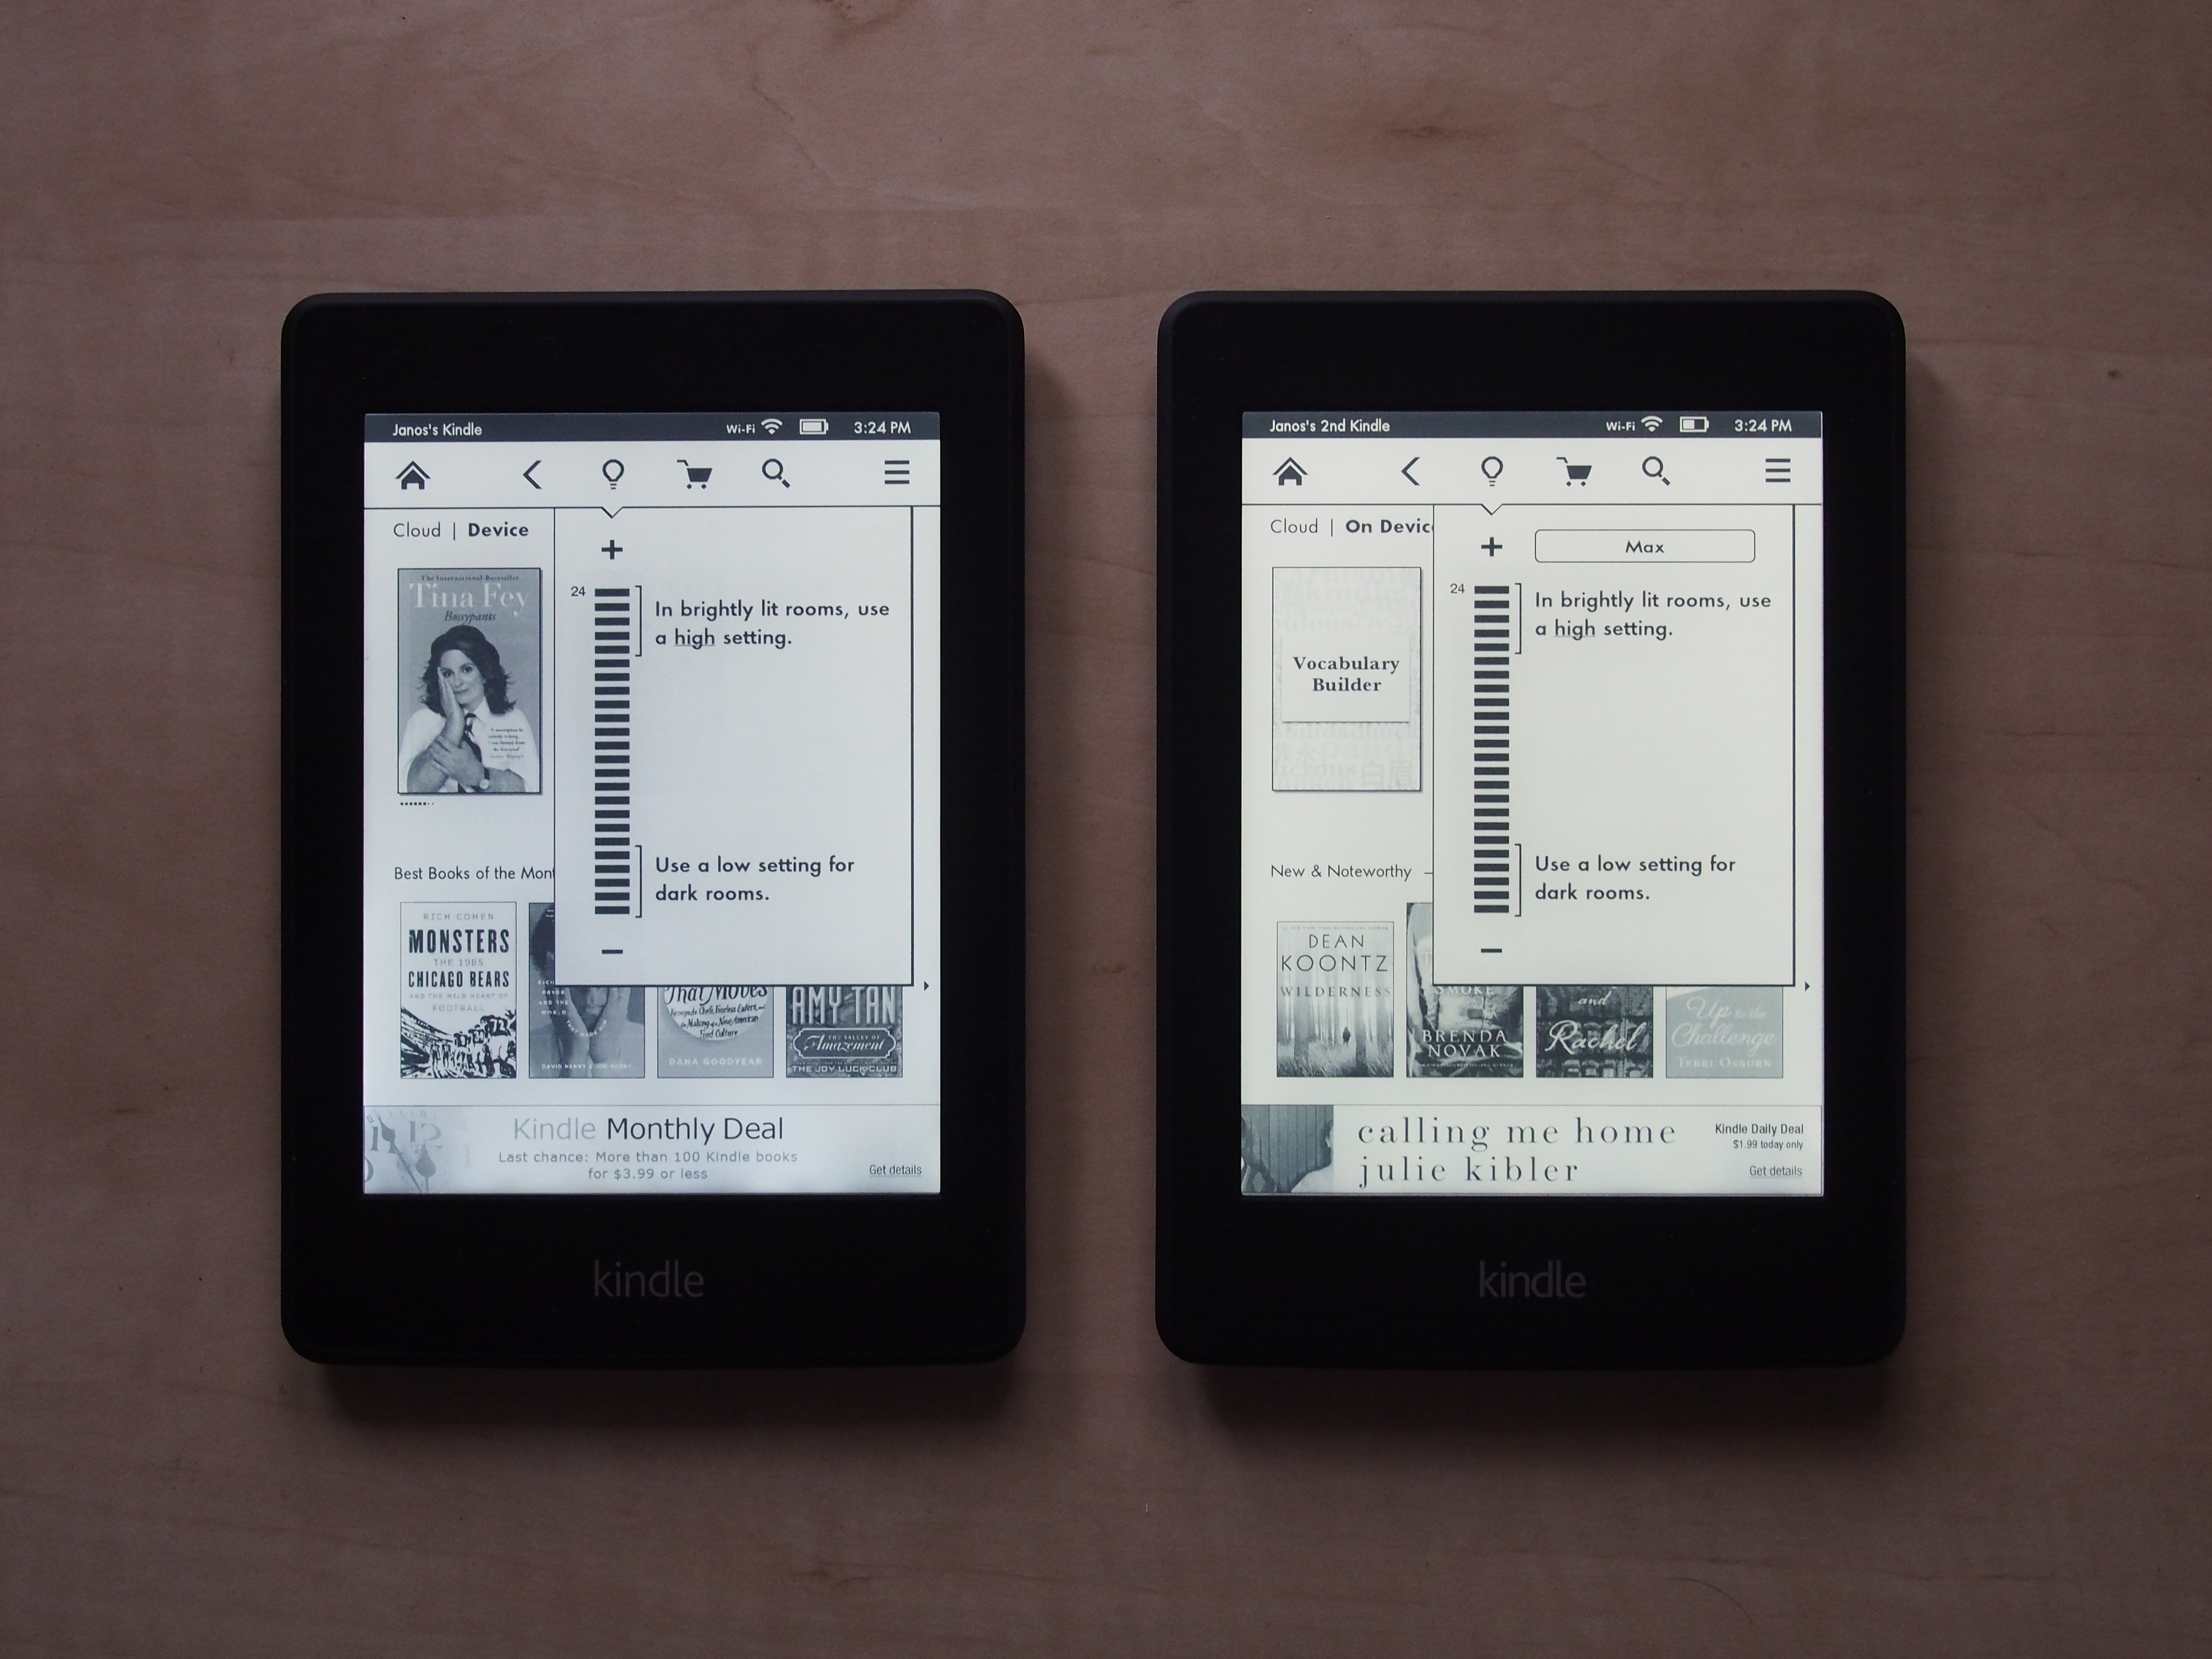 overdrive on kindle paperwhite